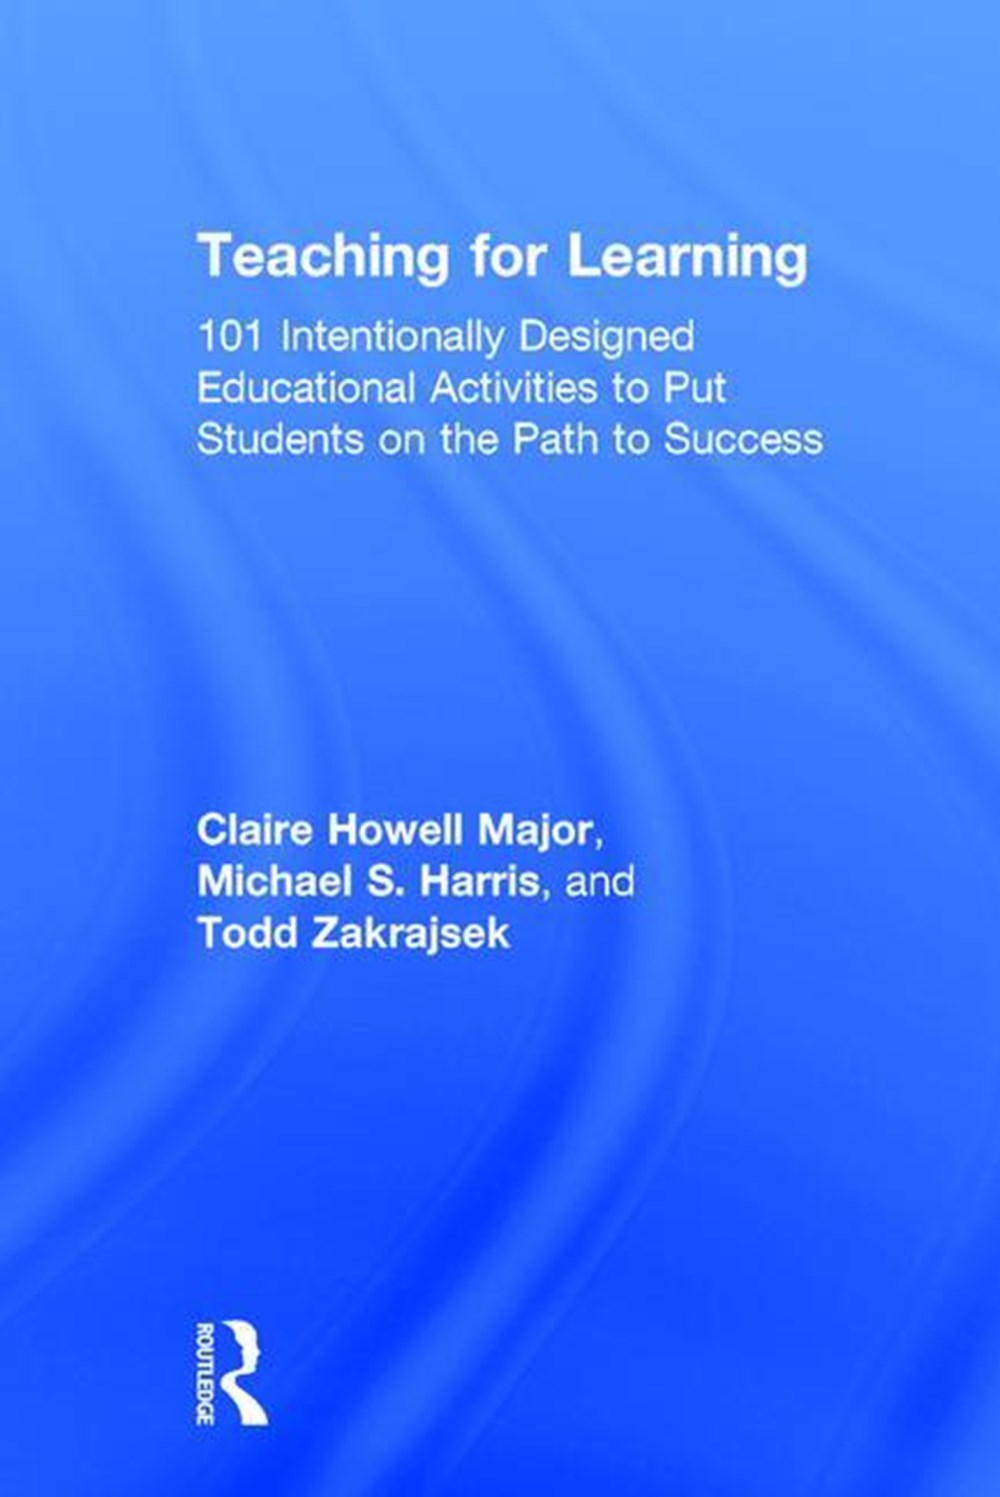 Teaching for Learning: 101 Intentionally Designed Educational Activities to Put Students on the Path